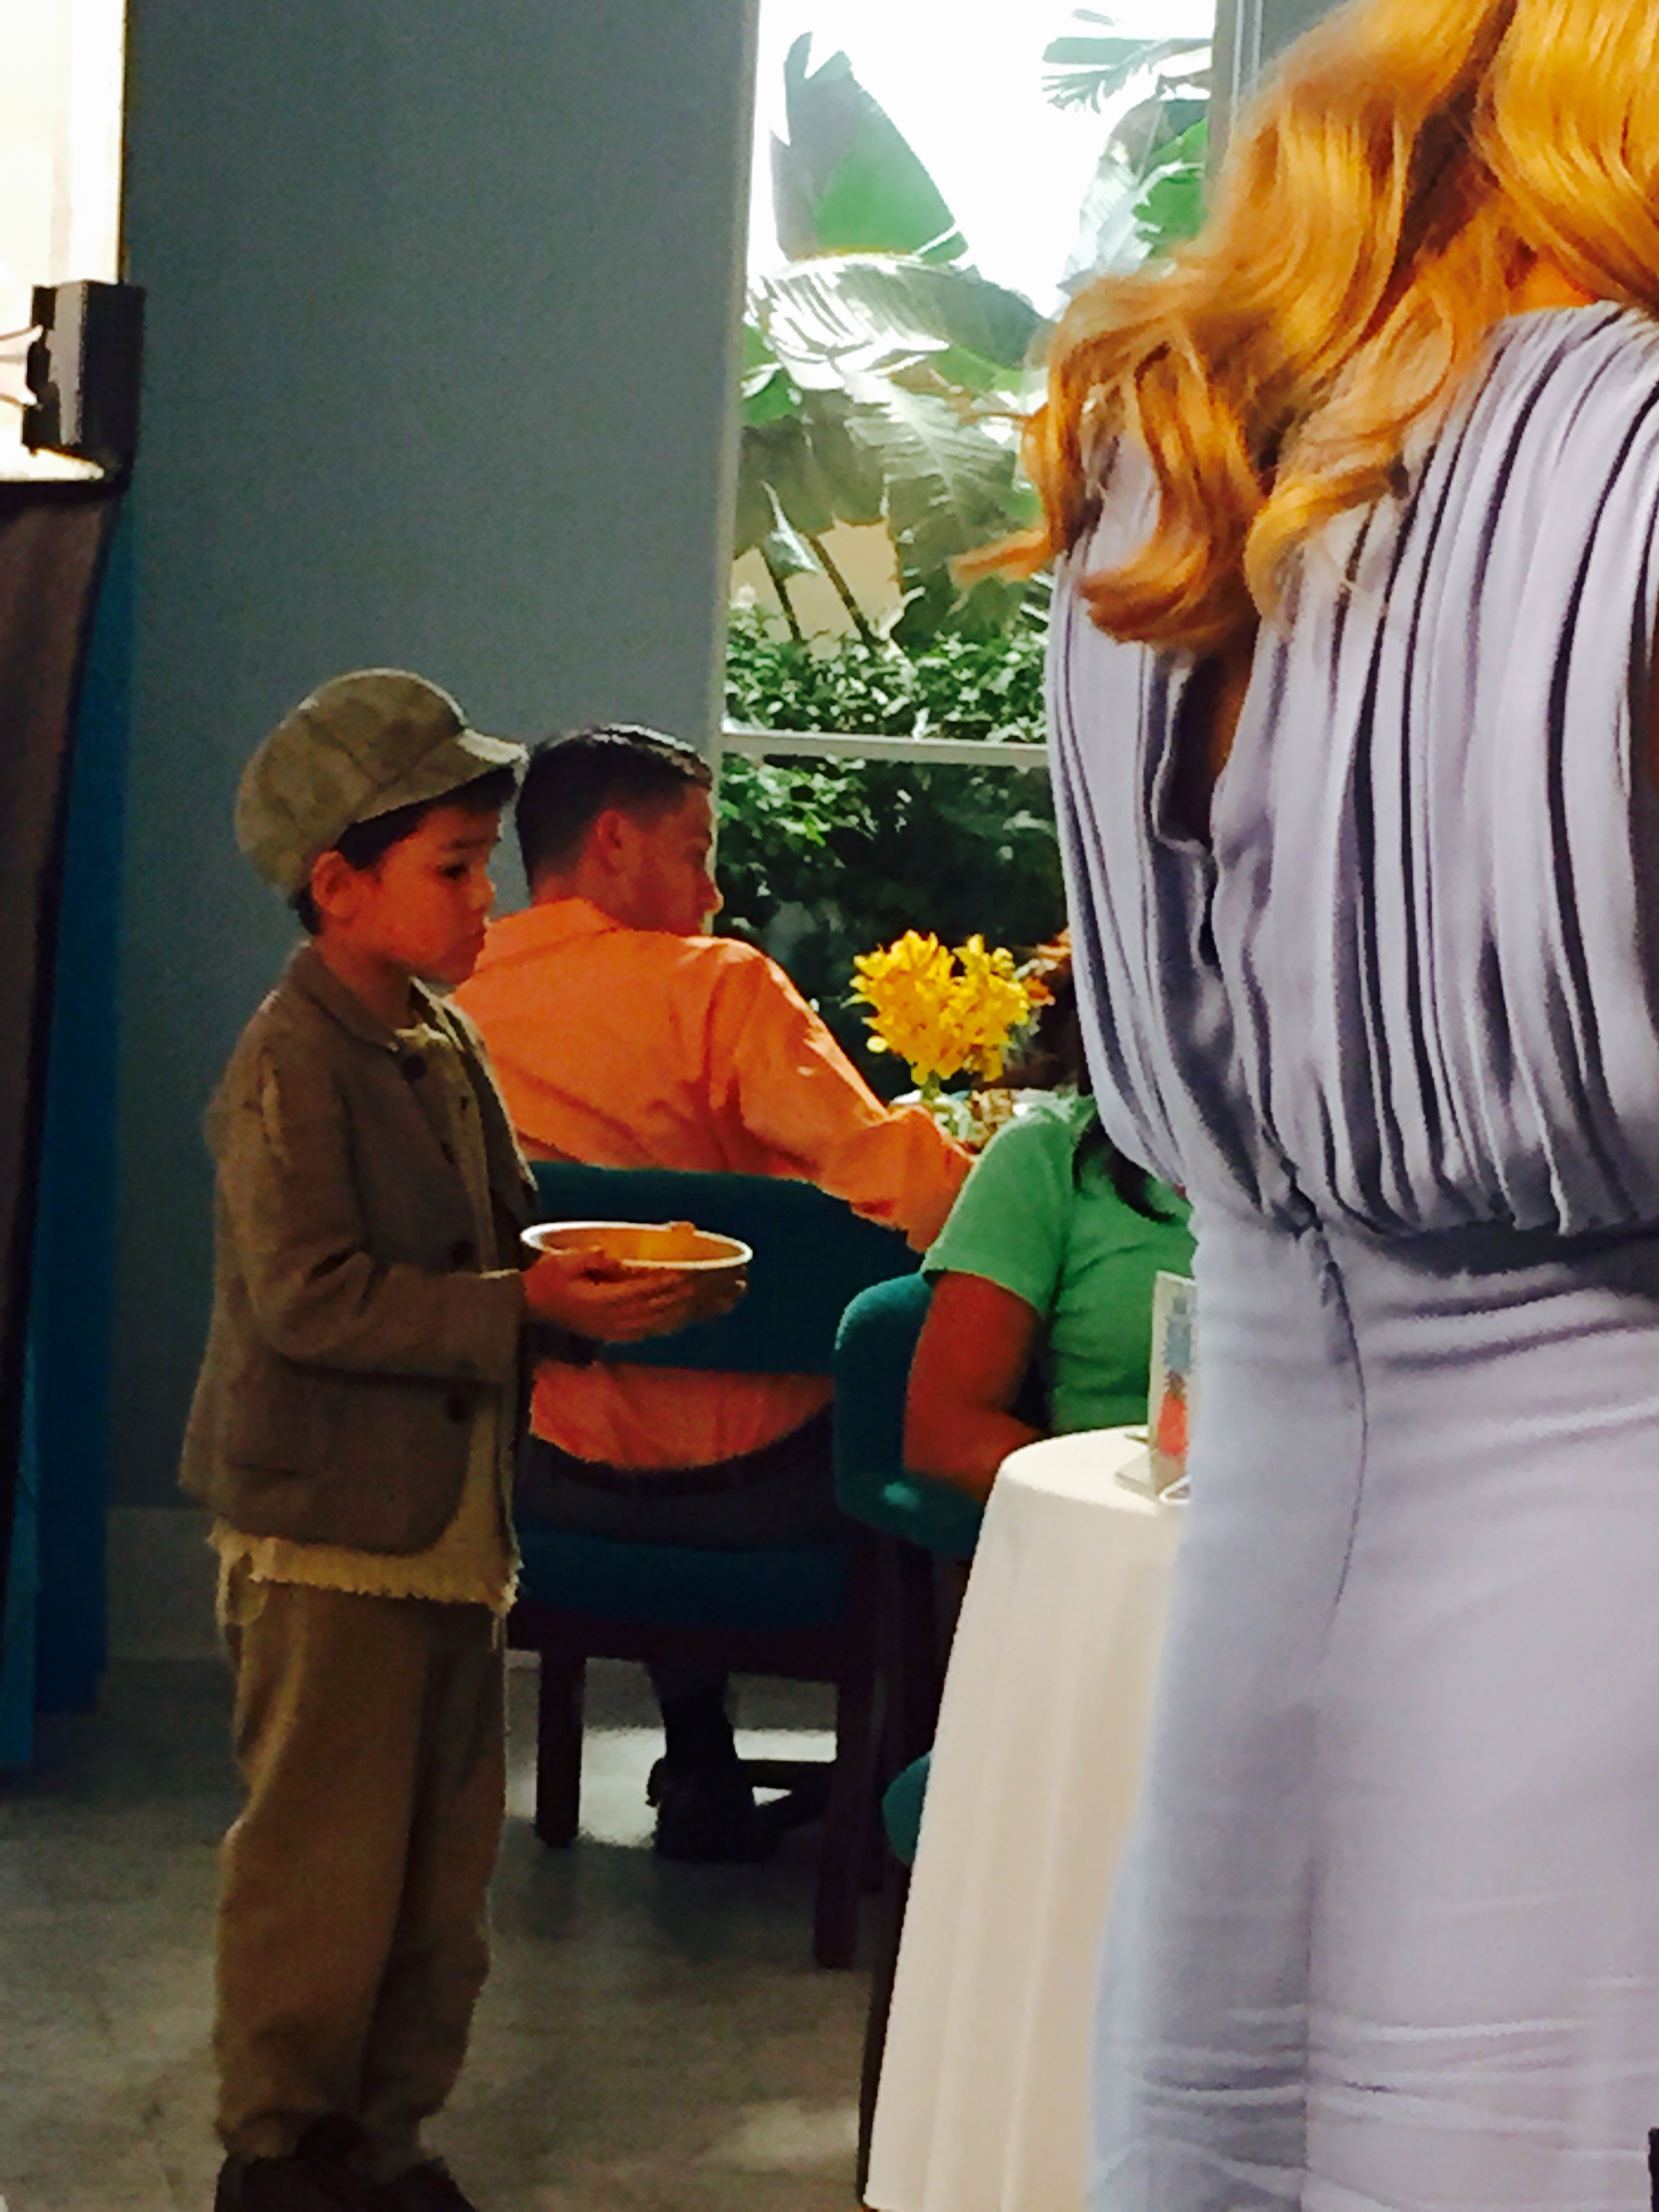 Madison playing Oliver Twist Mateo on Jane the Virgin, Chapter 28.